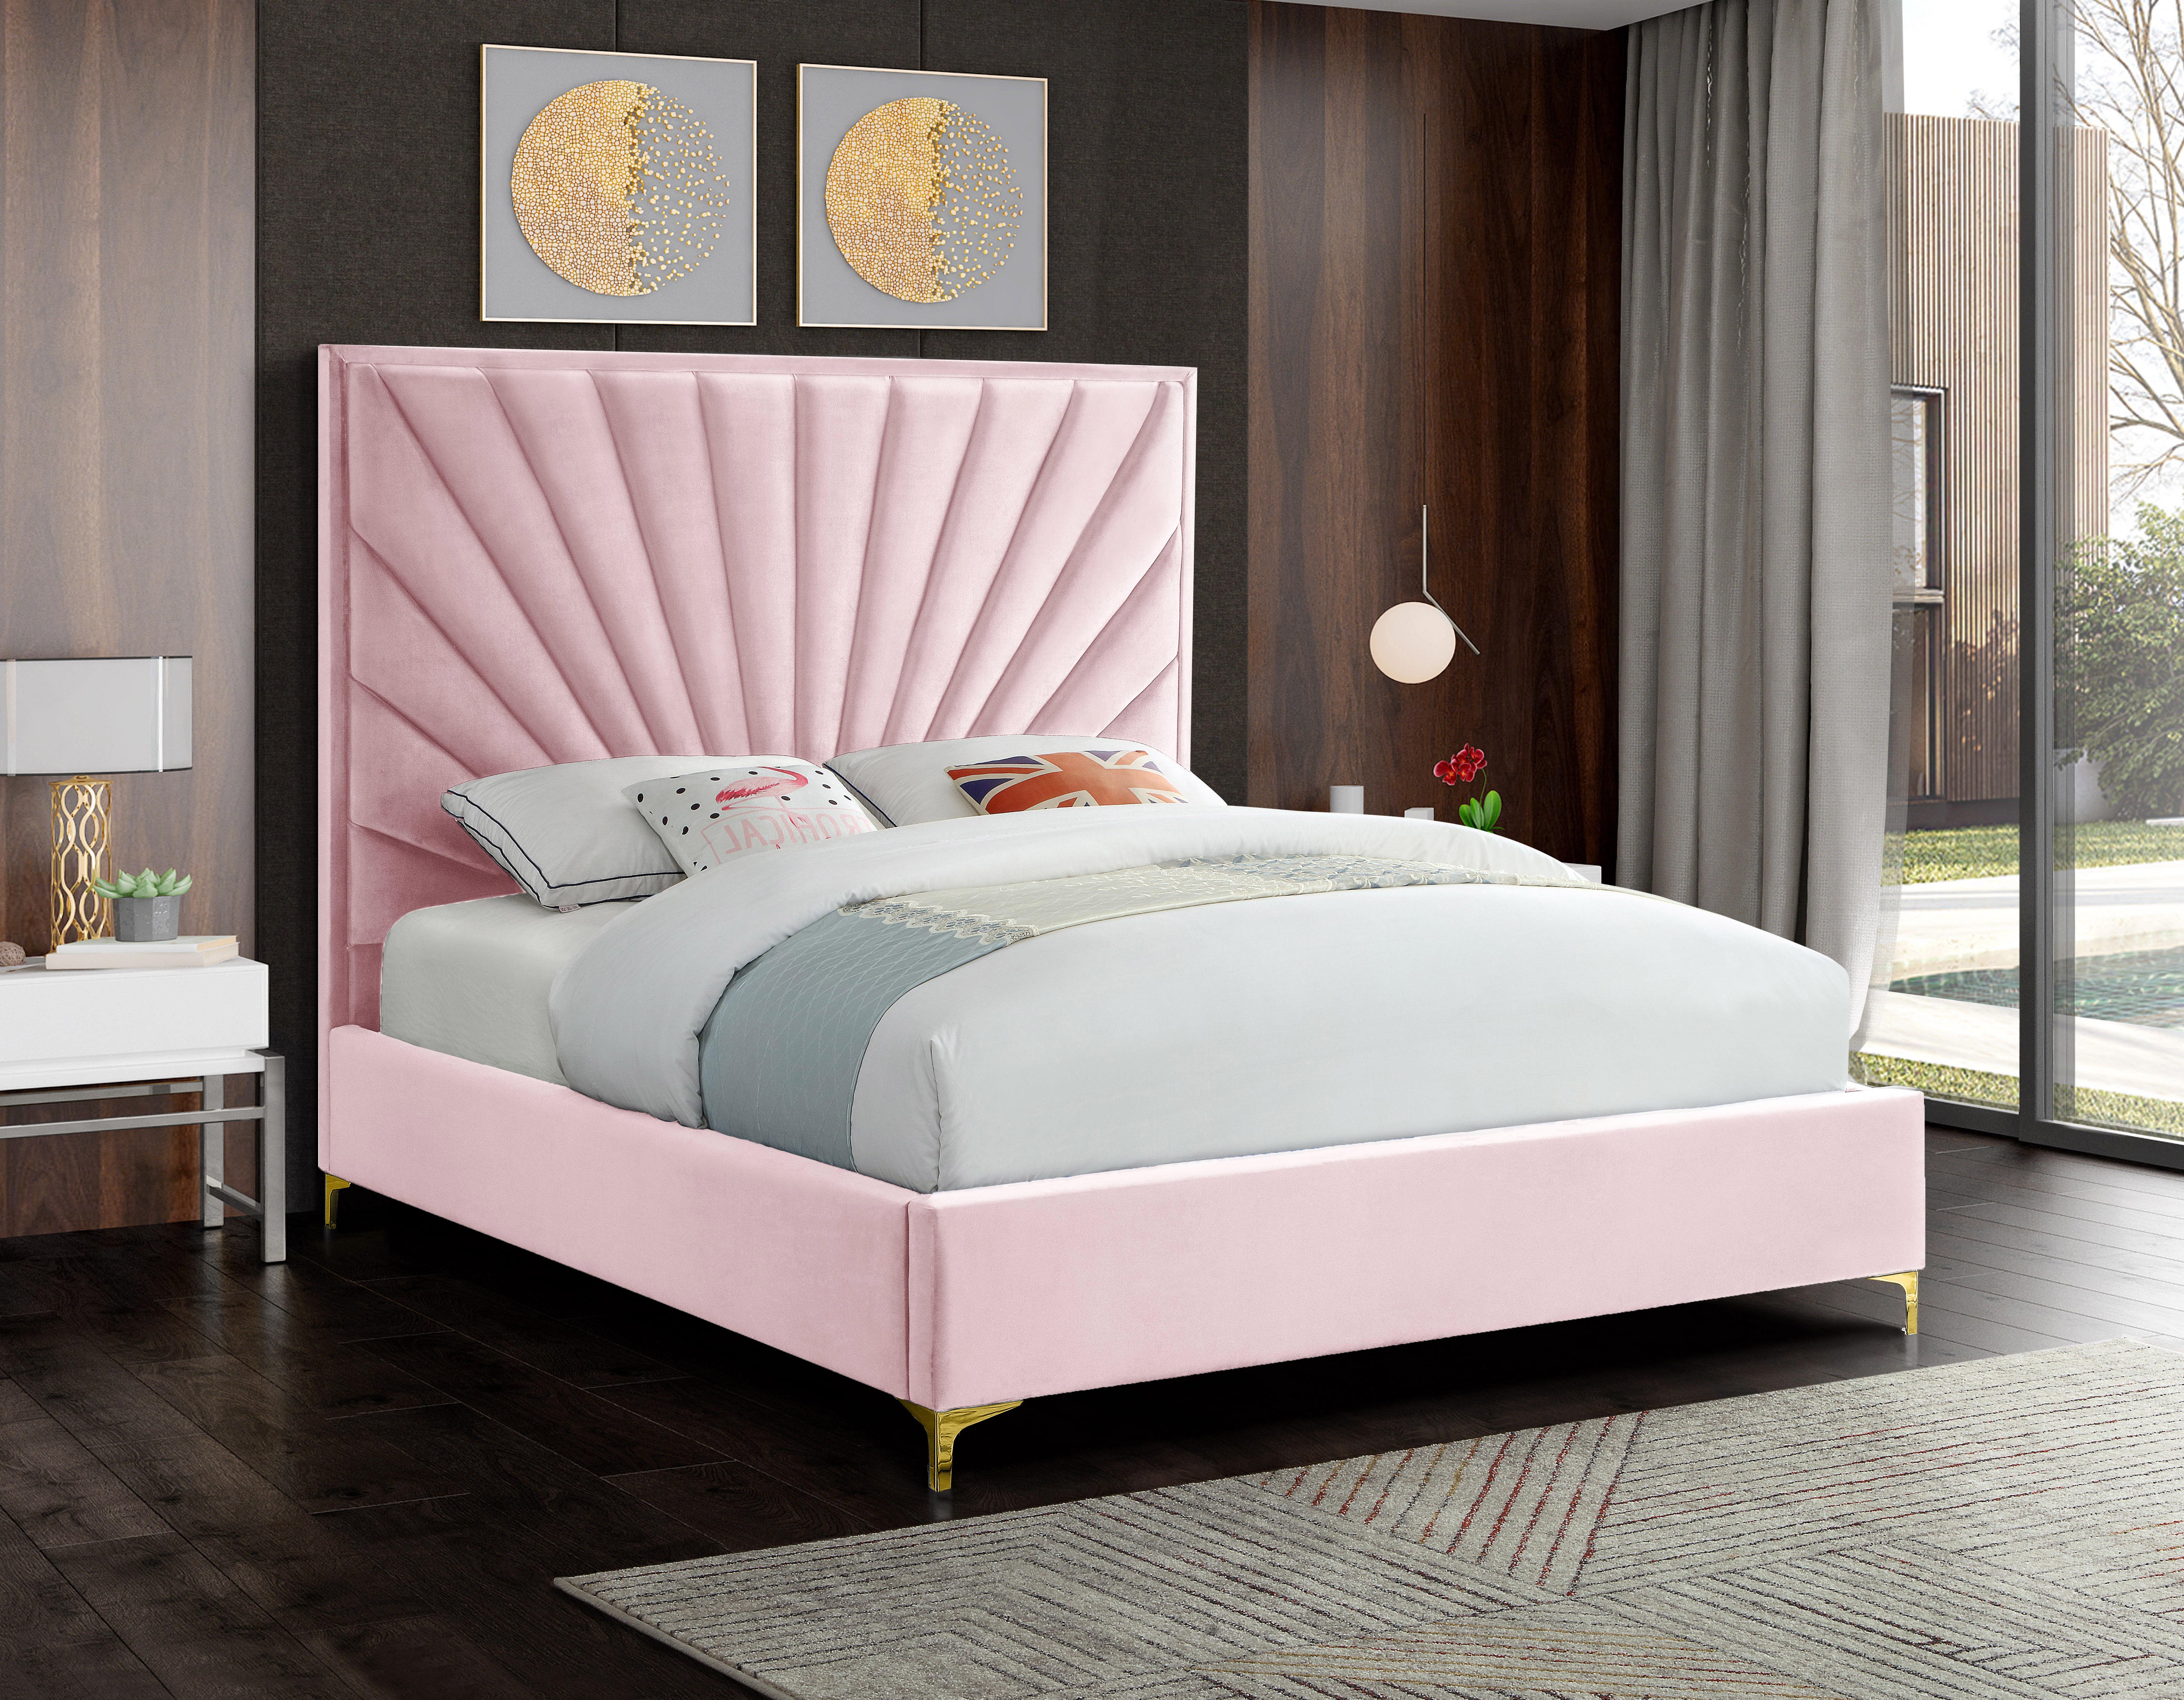 

    
Luxurious Pink Velvet Tufted King Bed ECLIPSE Meridian Contemporary Modern
